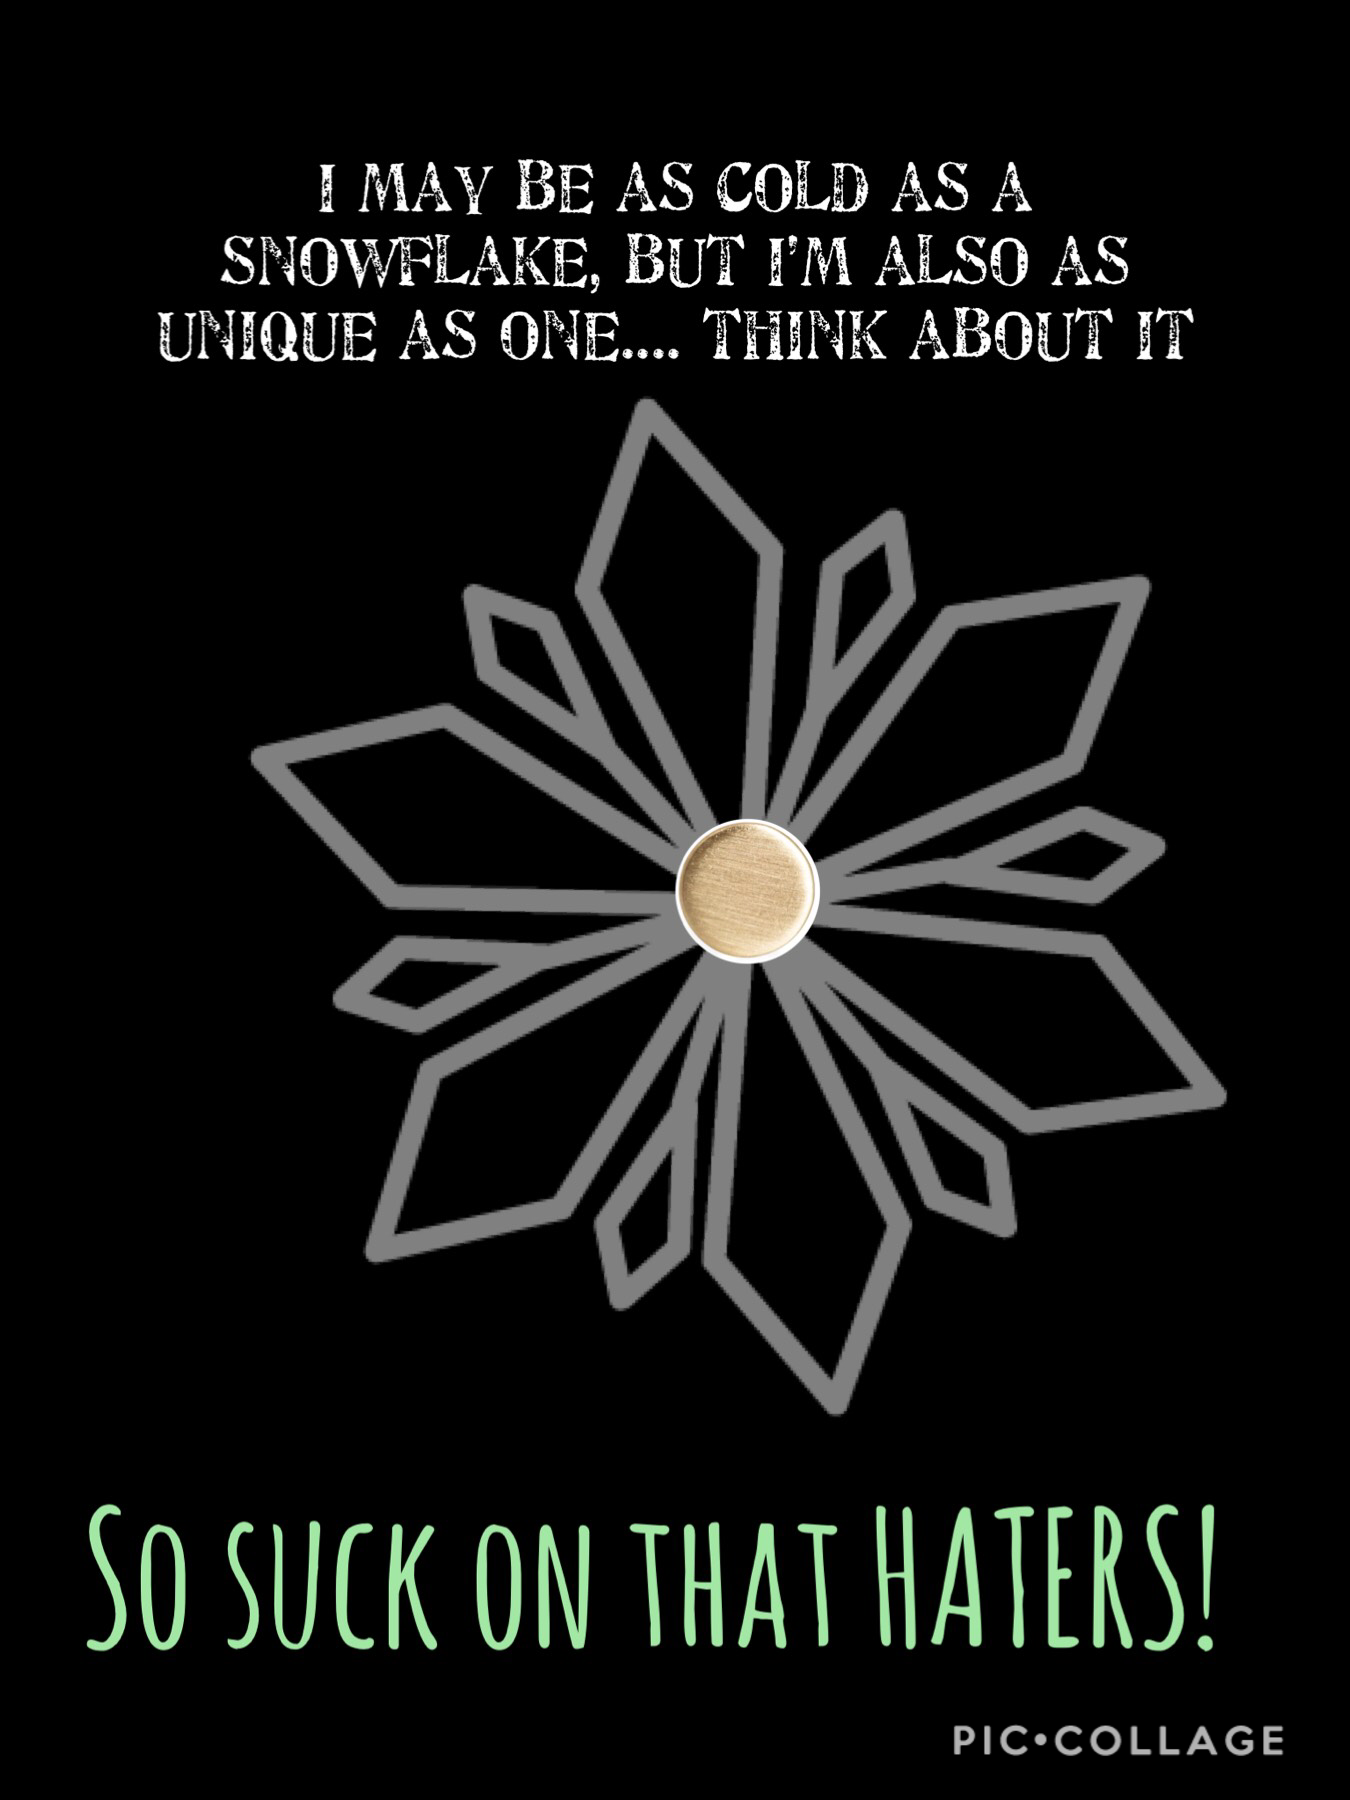 We’re all snowflakes 